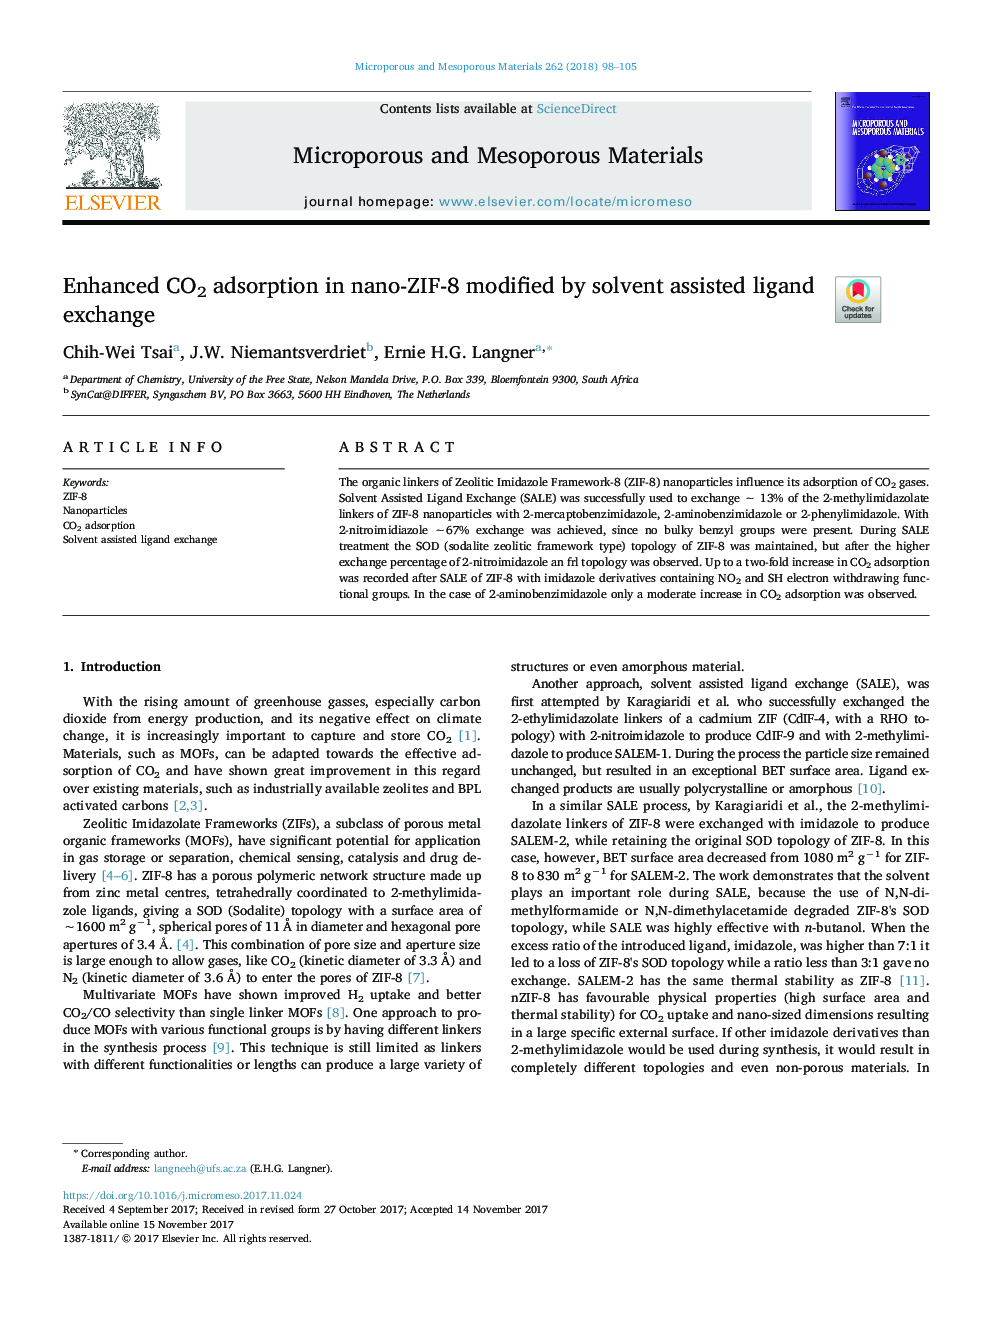 Enhanced CO2 adsorption in nano-ZIF-8 modified by solvent assisted ligand exchange